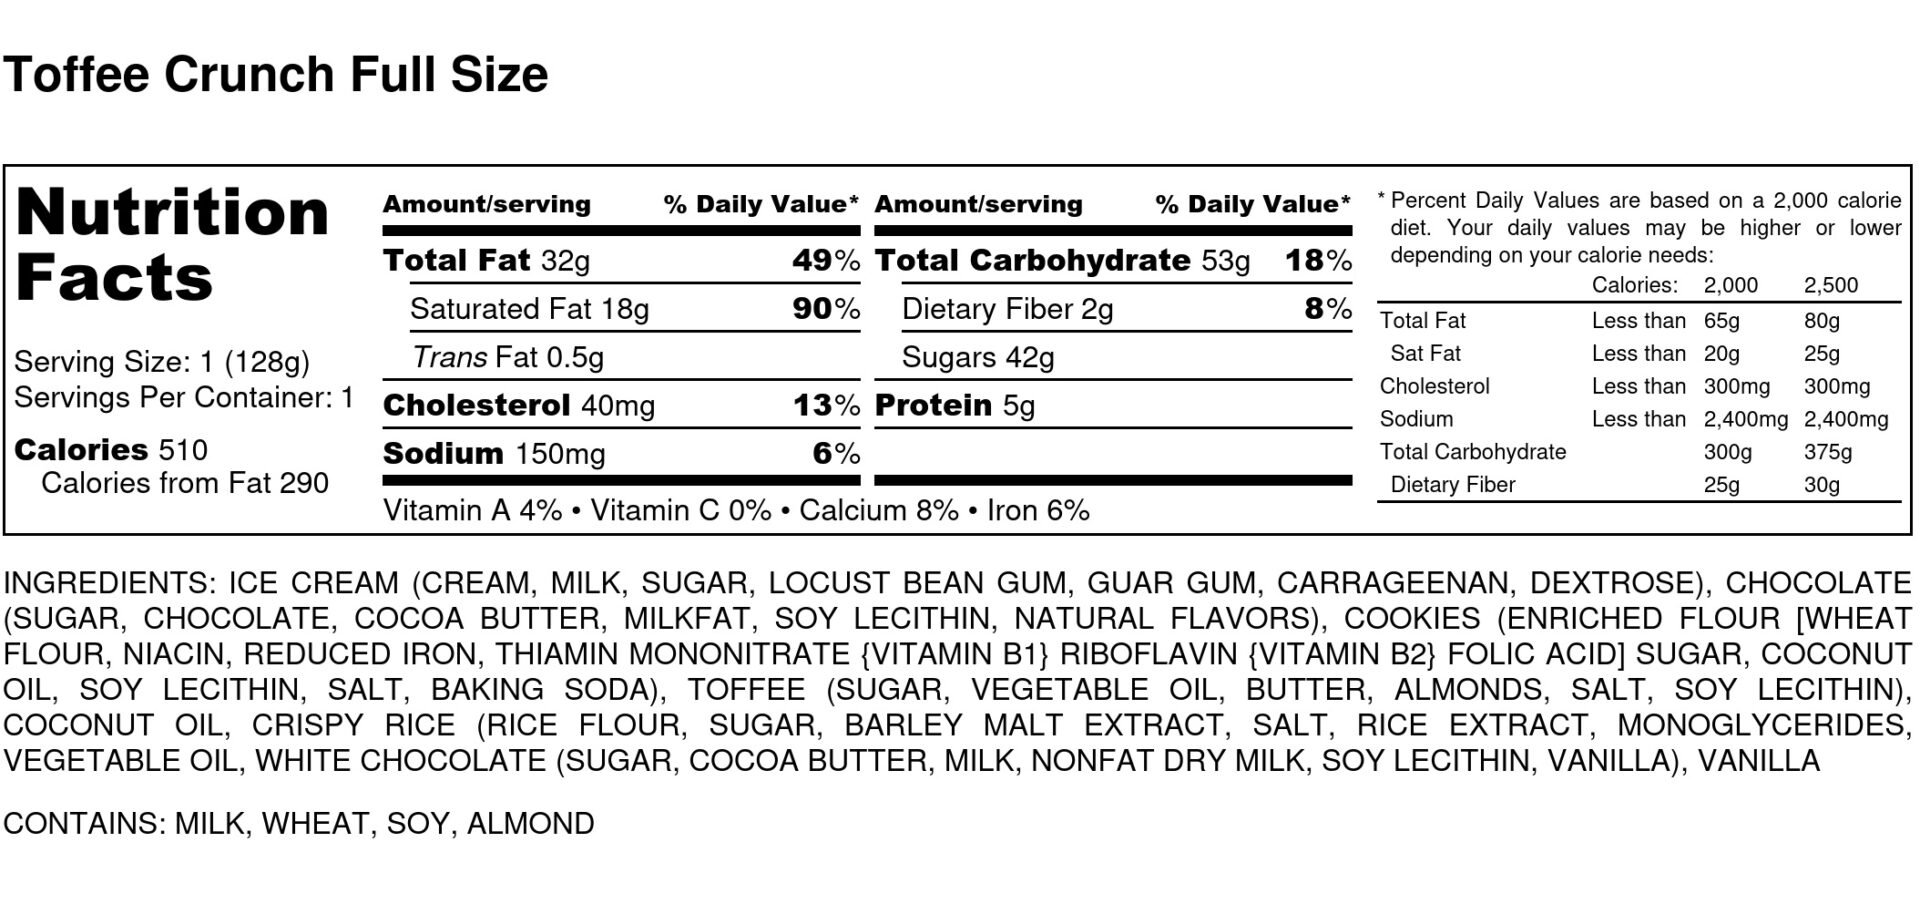 Toffee Crunch Full Size Nutrition Label scaled